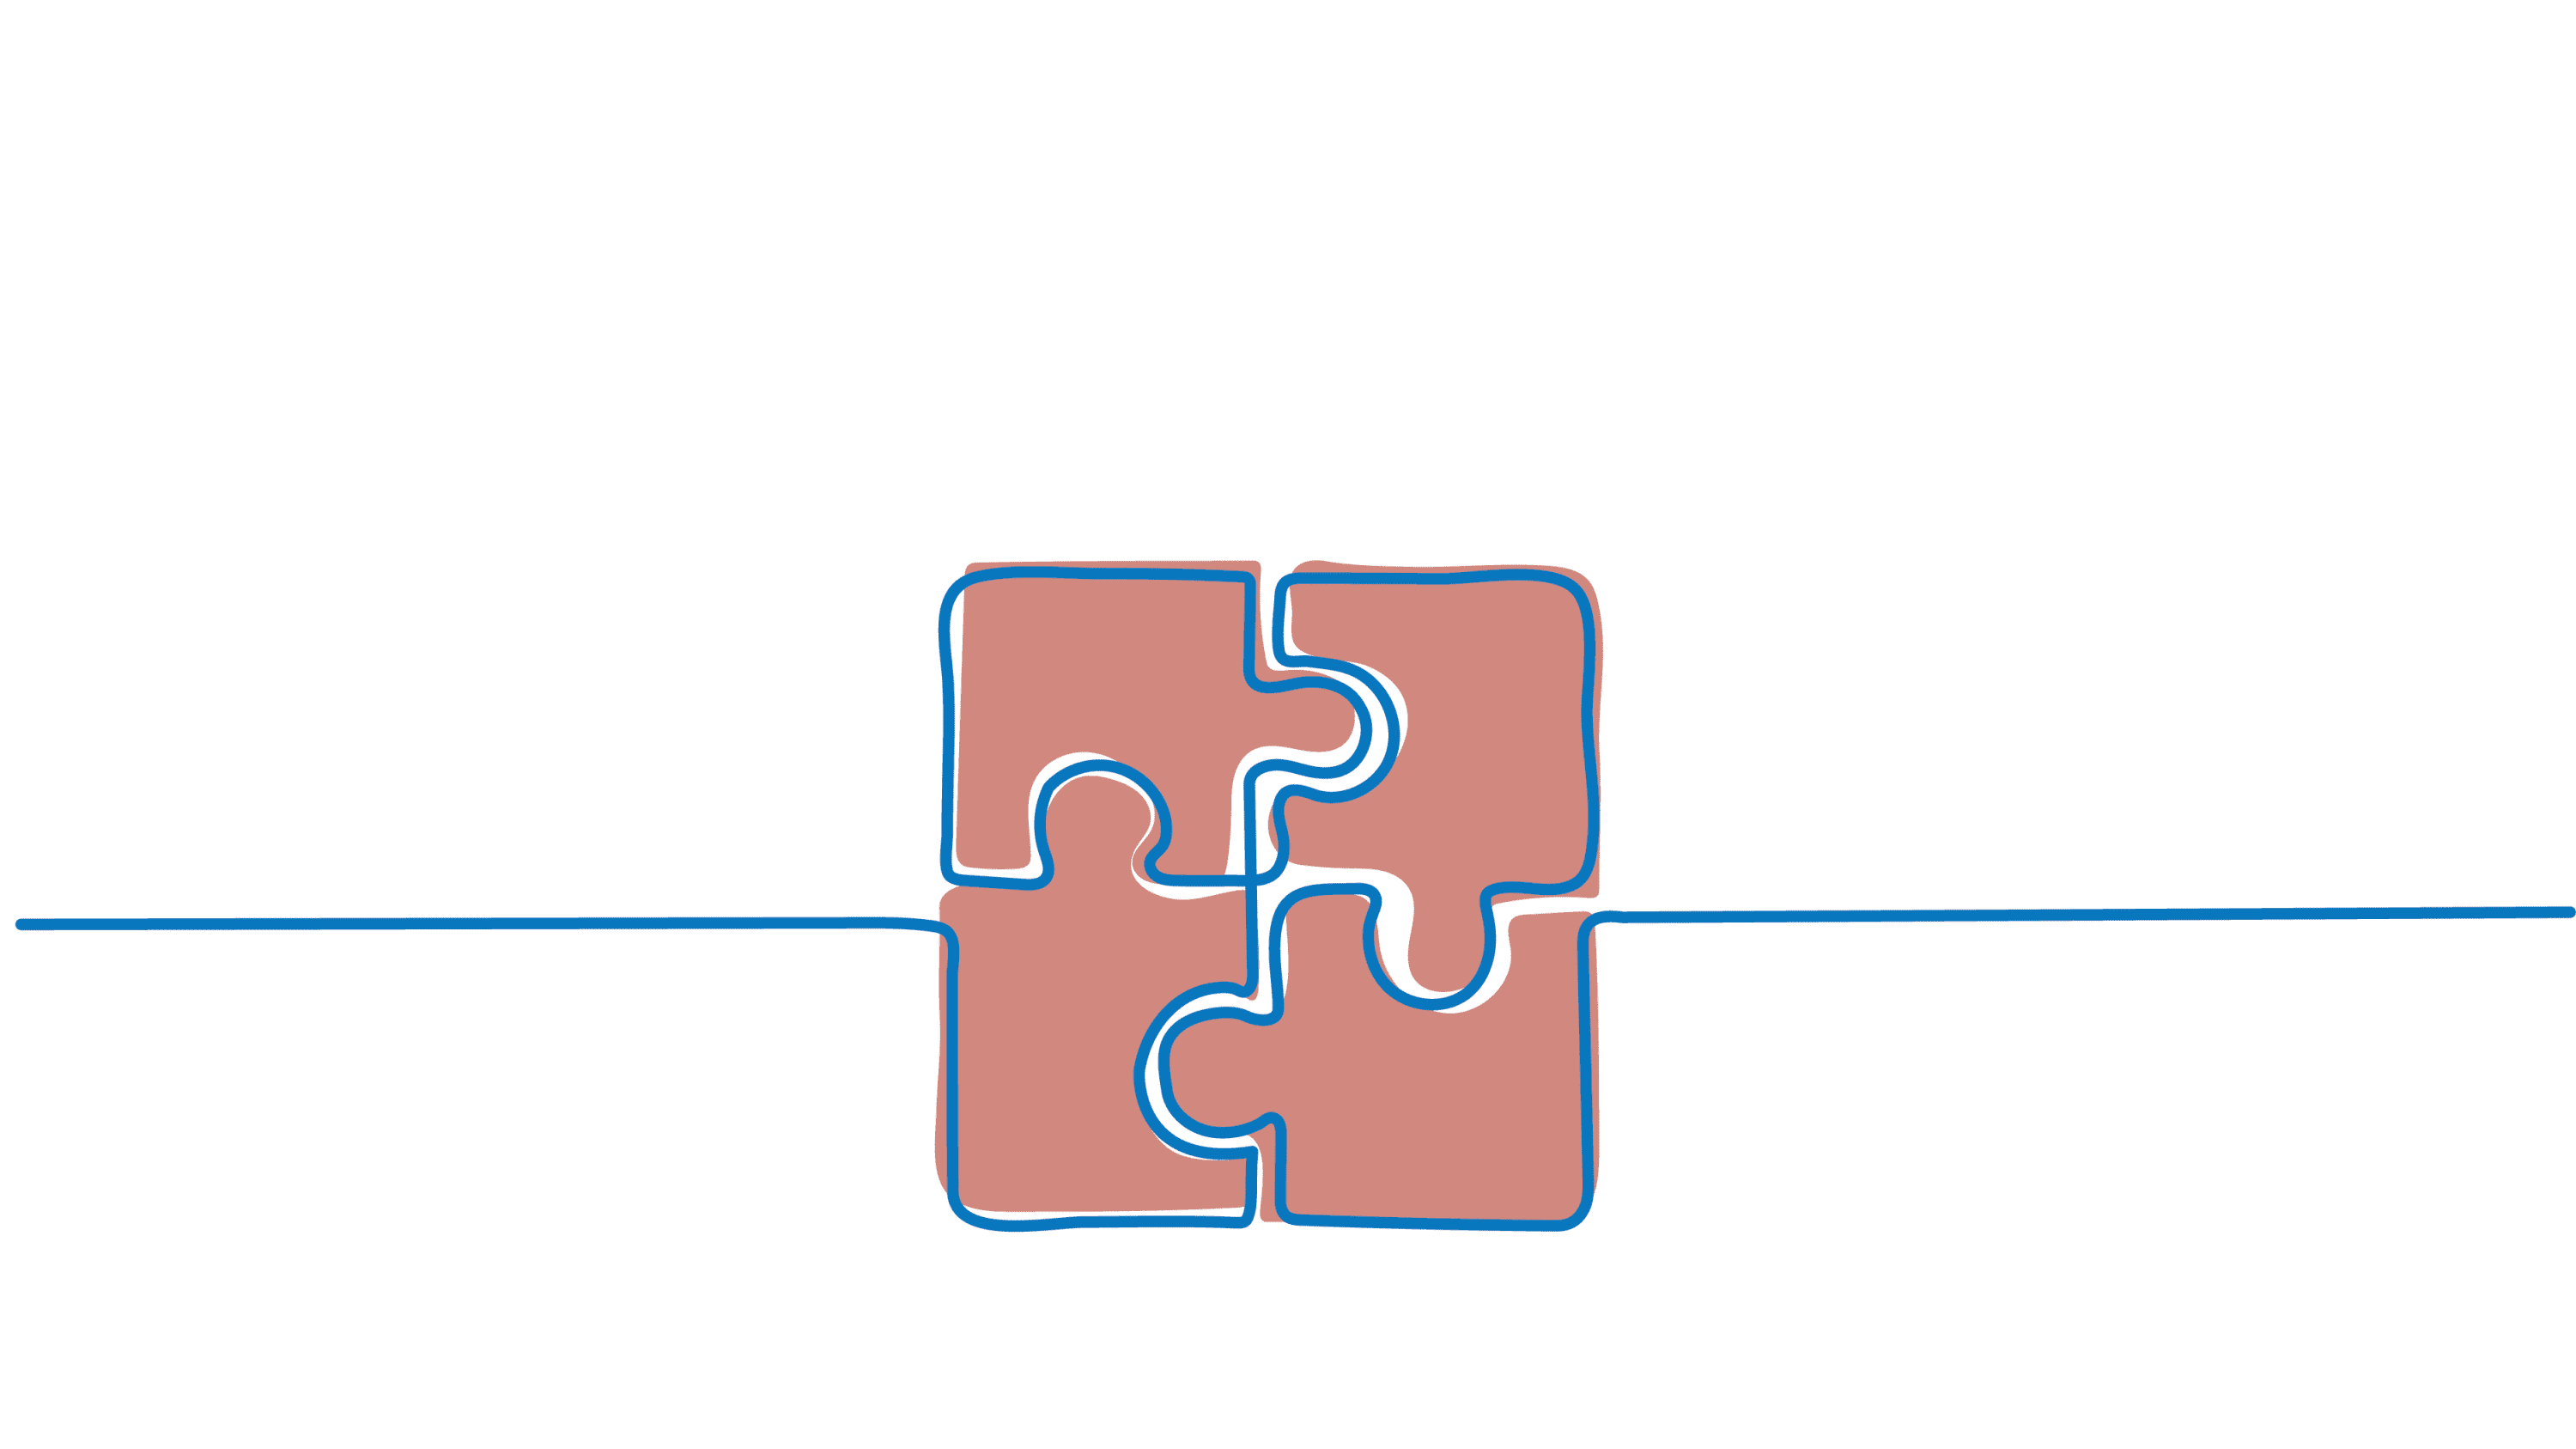 Line drawing of puzzle pieces fitting together